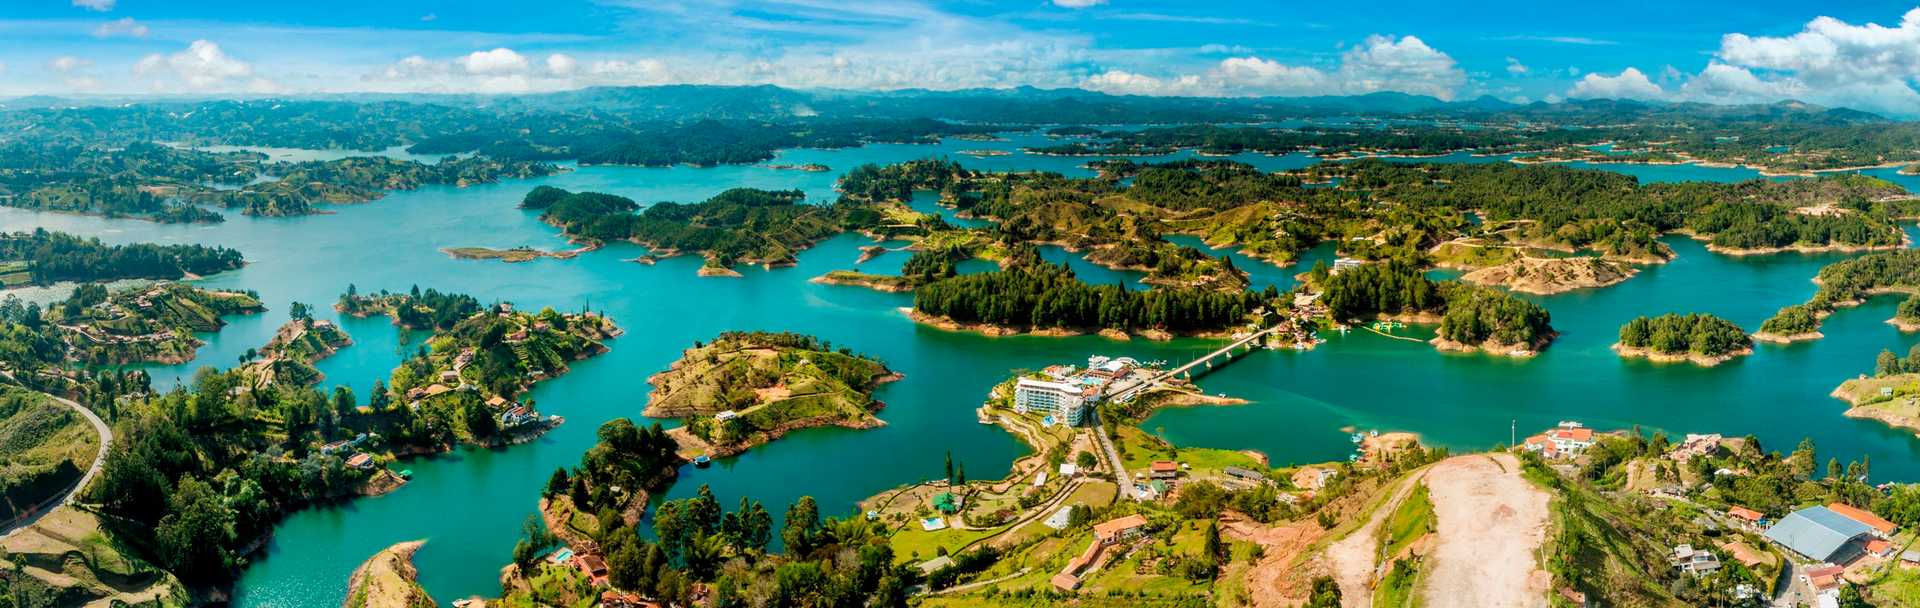 Colombia Tour - Stunning landscape in Guatape